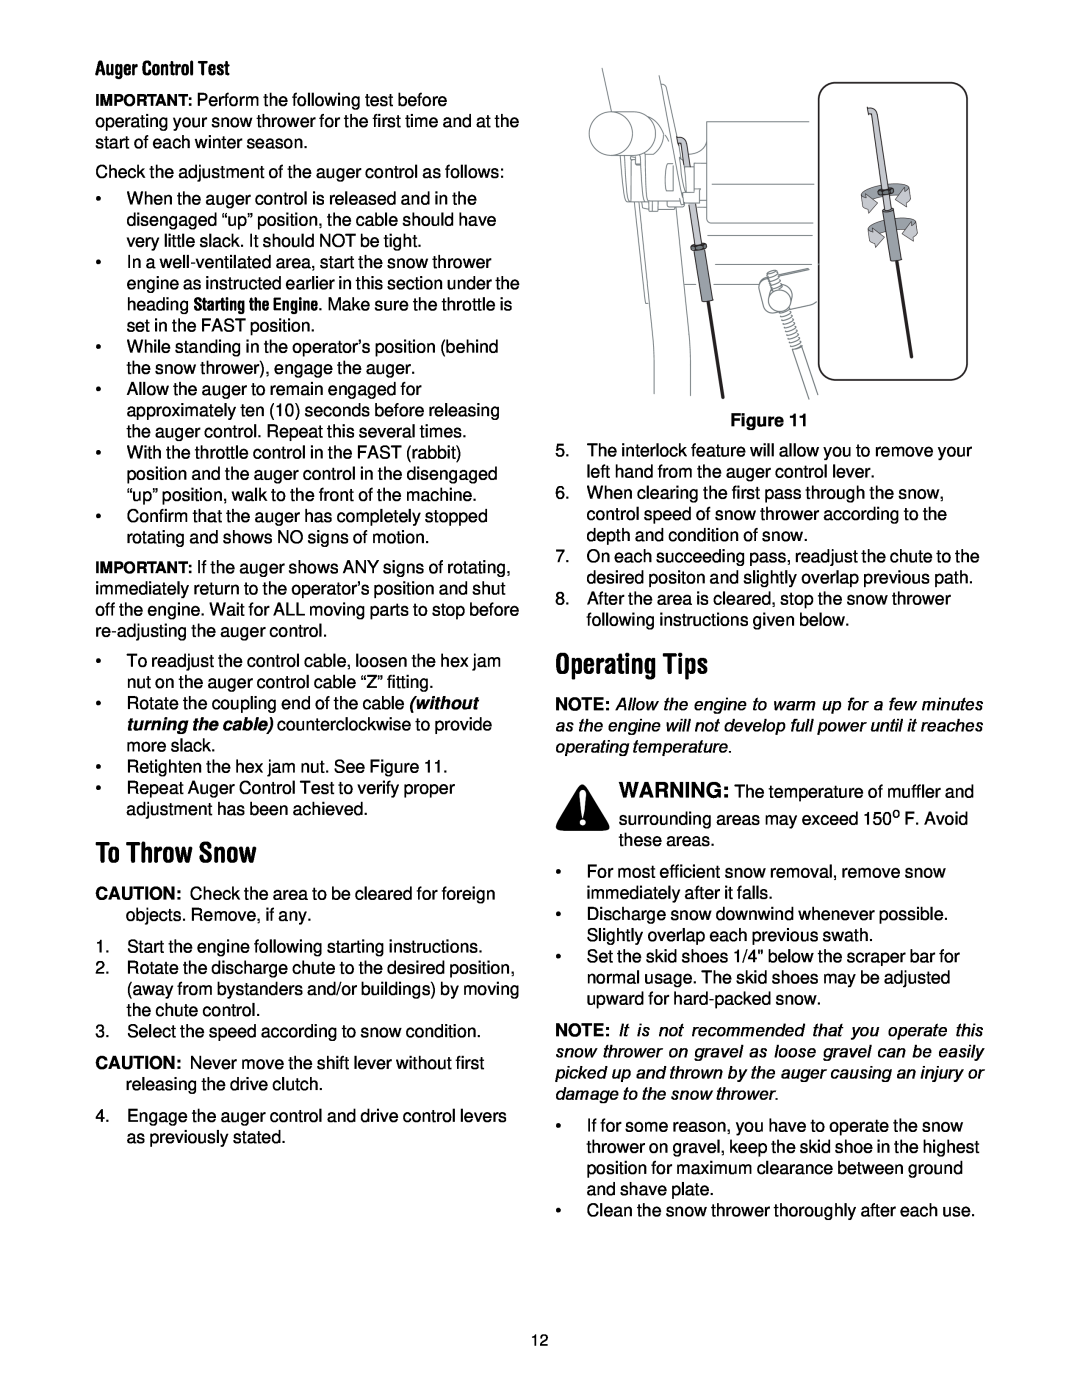 MTD 60-3754-4, 60-3753-6 manual To Throw Snow, Operating Tips, Auger Control Test, Figure 